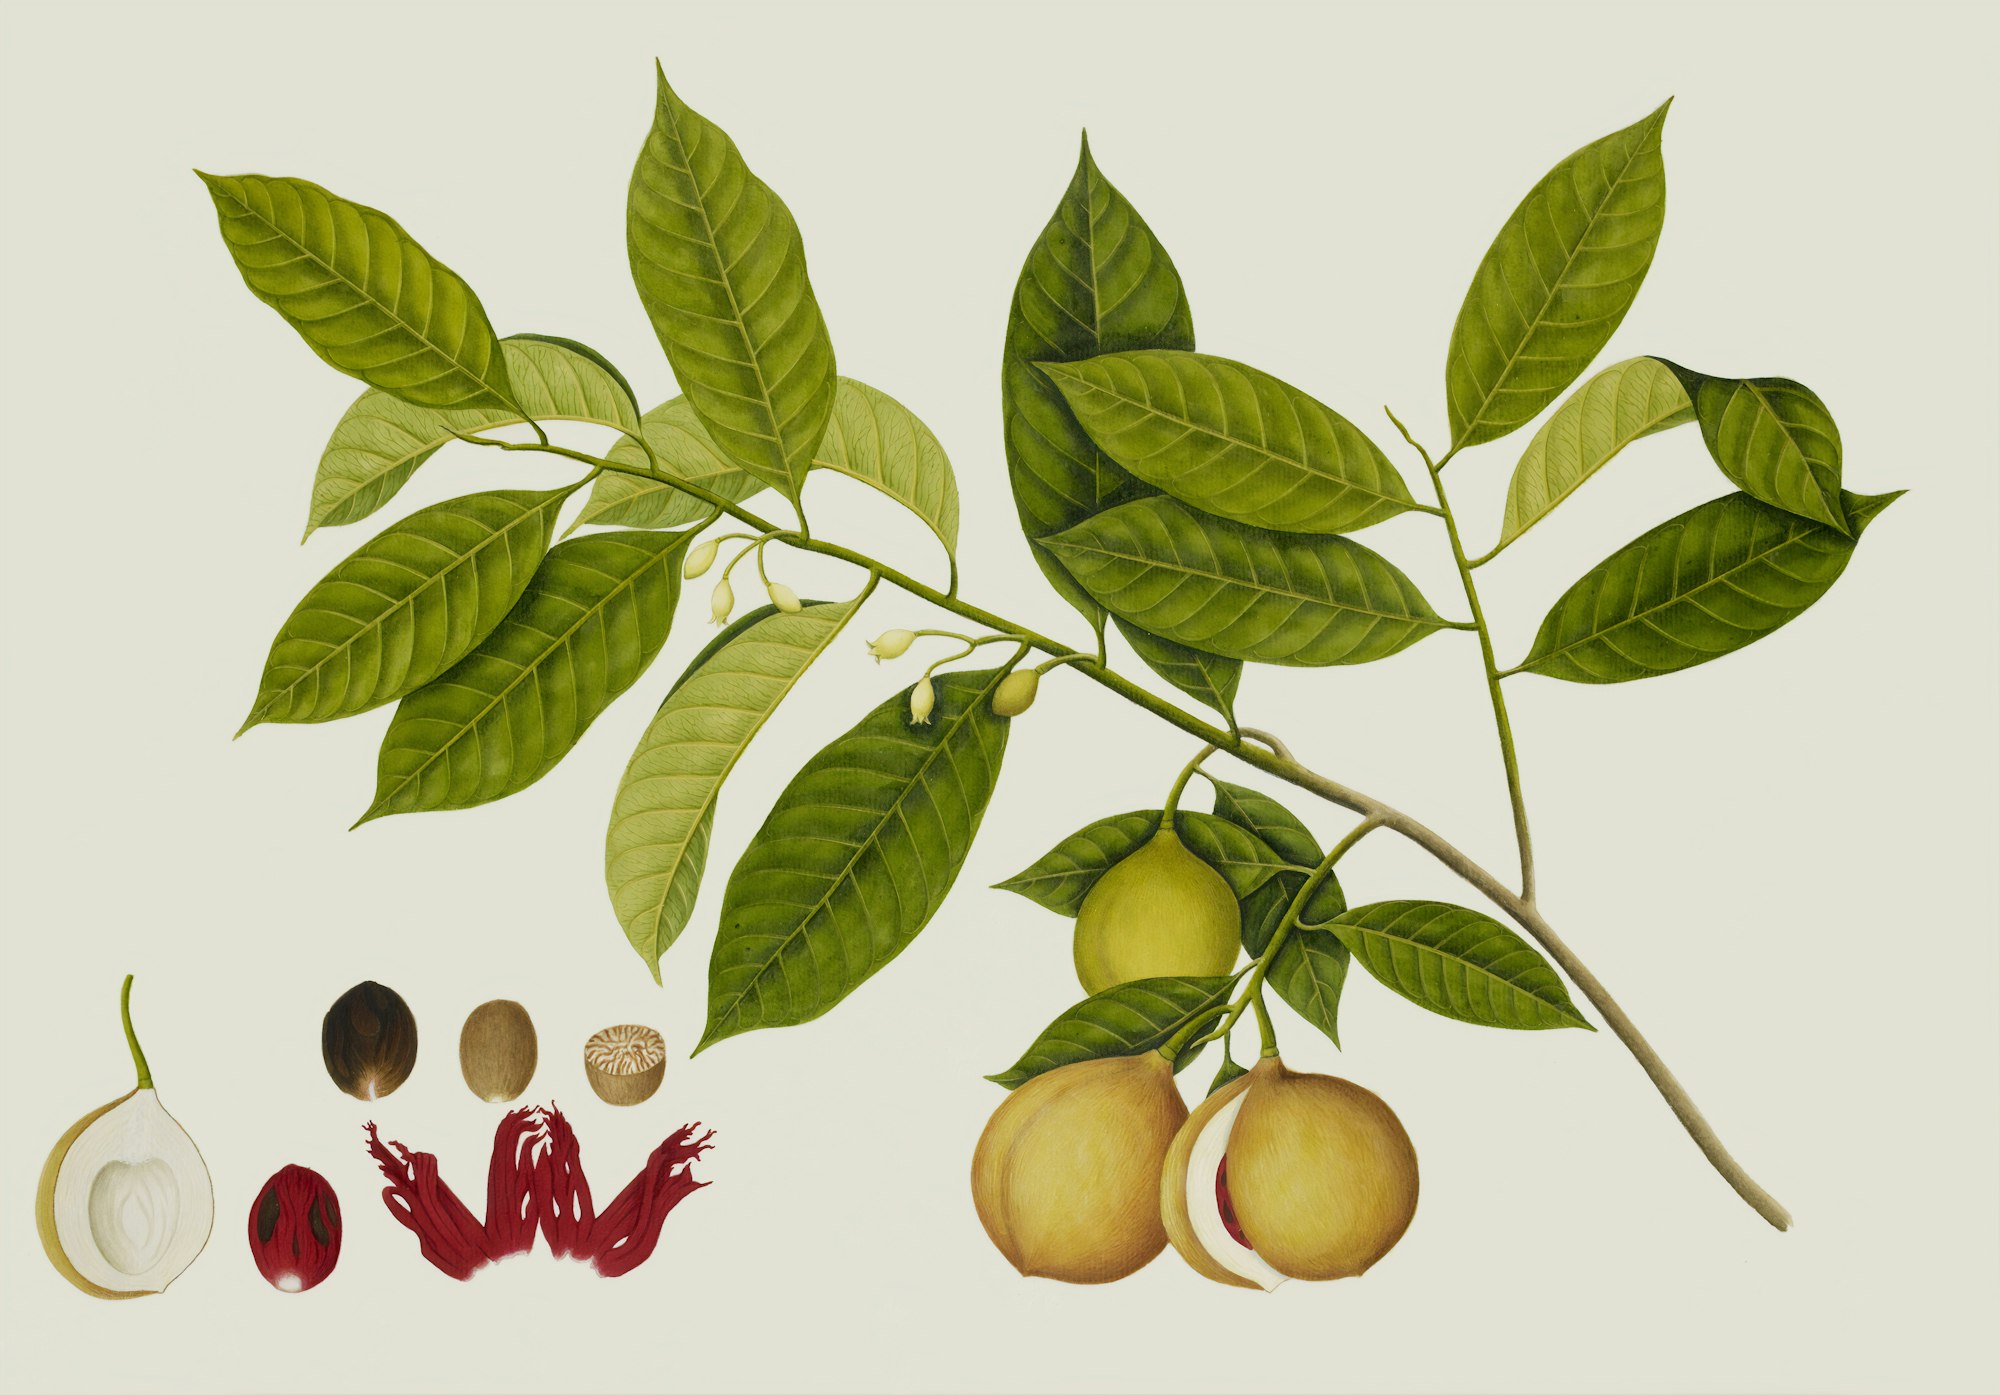 Myristica Fragrans' Hout. (Myristicaceae). Nutmeg Tree. From an album of 40 drawings made by Chinese artists at Bencoolen, Sumatra, for Sir Stamford Raffles. Watercolour. Originally published/produced in c.1824.